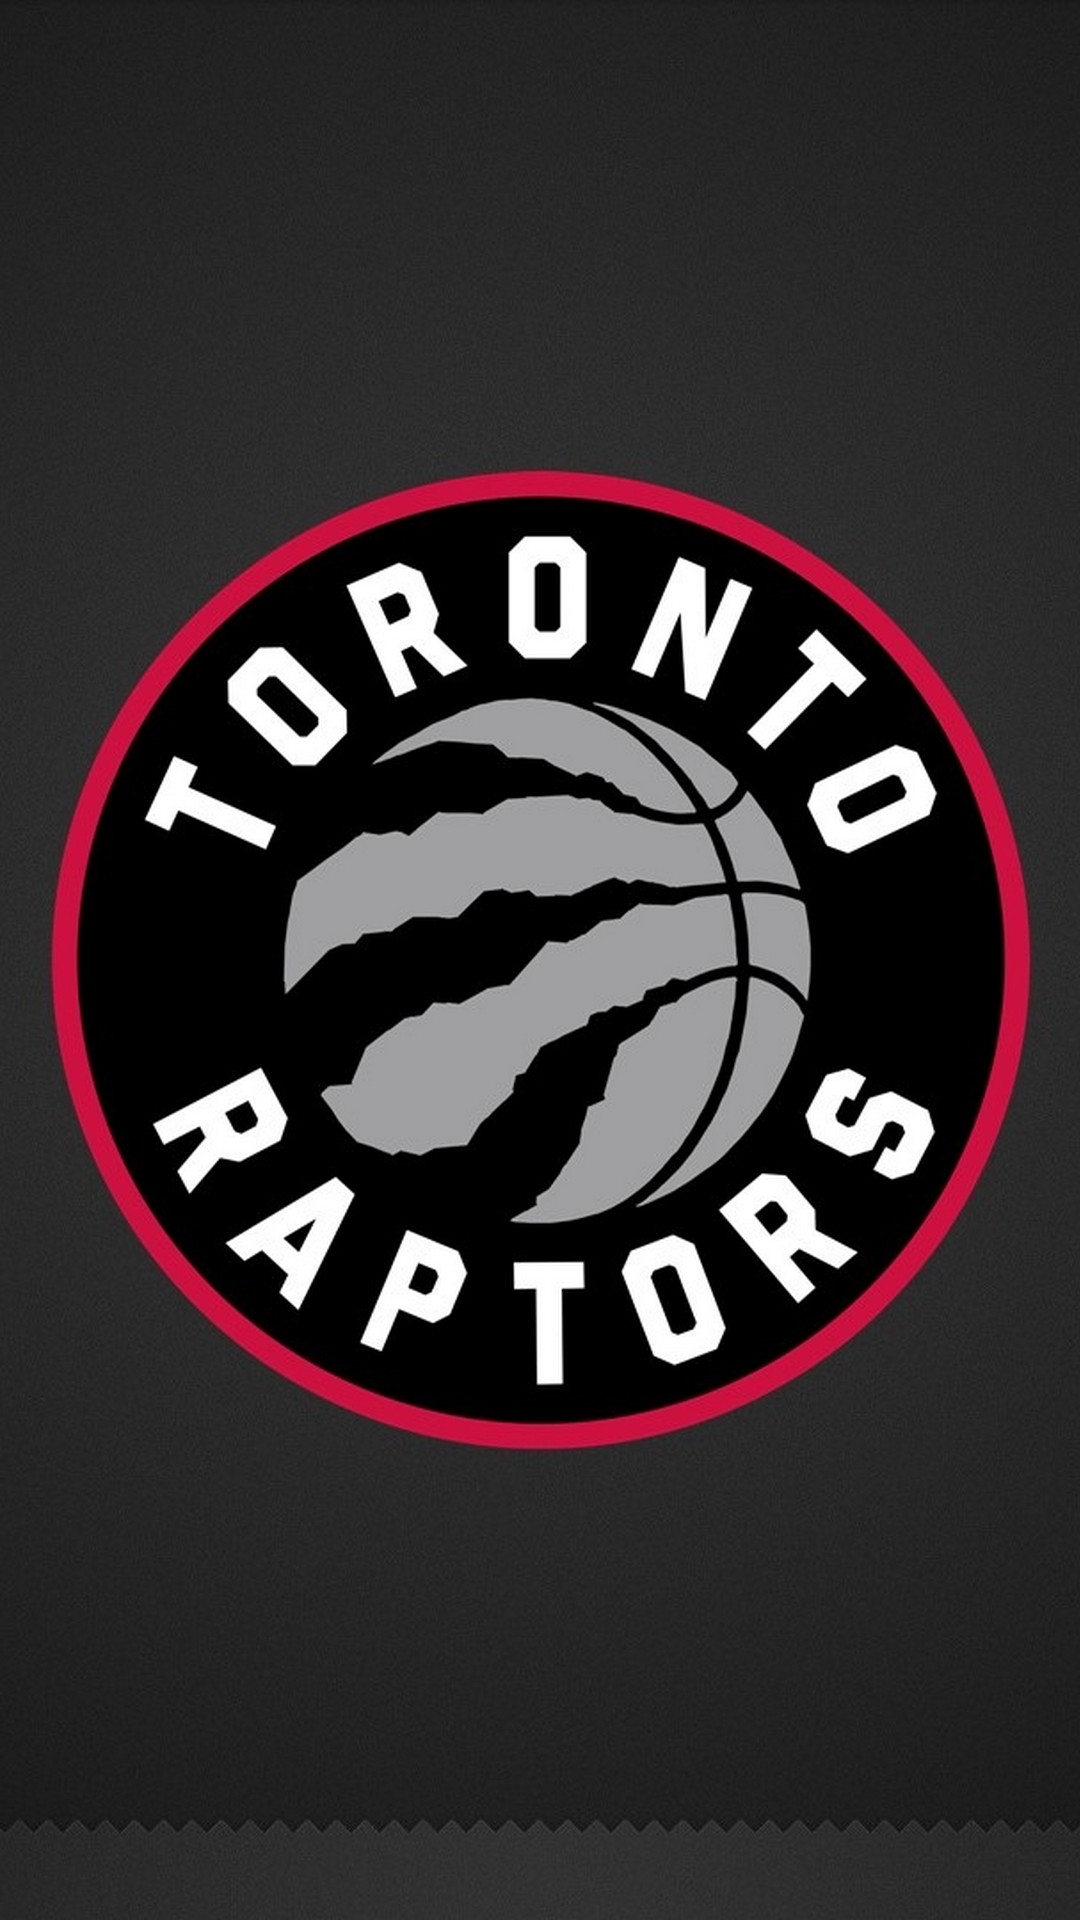 Wallpapers Phone Toronto Raptors with image resolution 1080x1920 pixel. You can make this wallpaper for your Android backgrounds, Tablet, Smartphones Screensavers and Mobile Phone Lock Screen